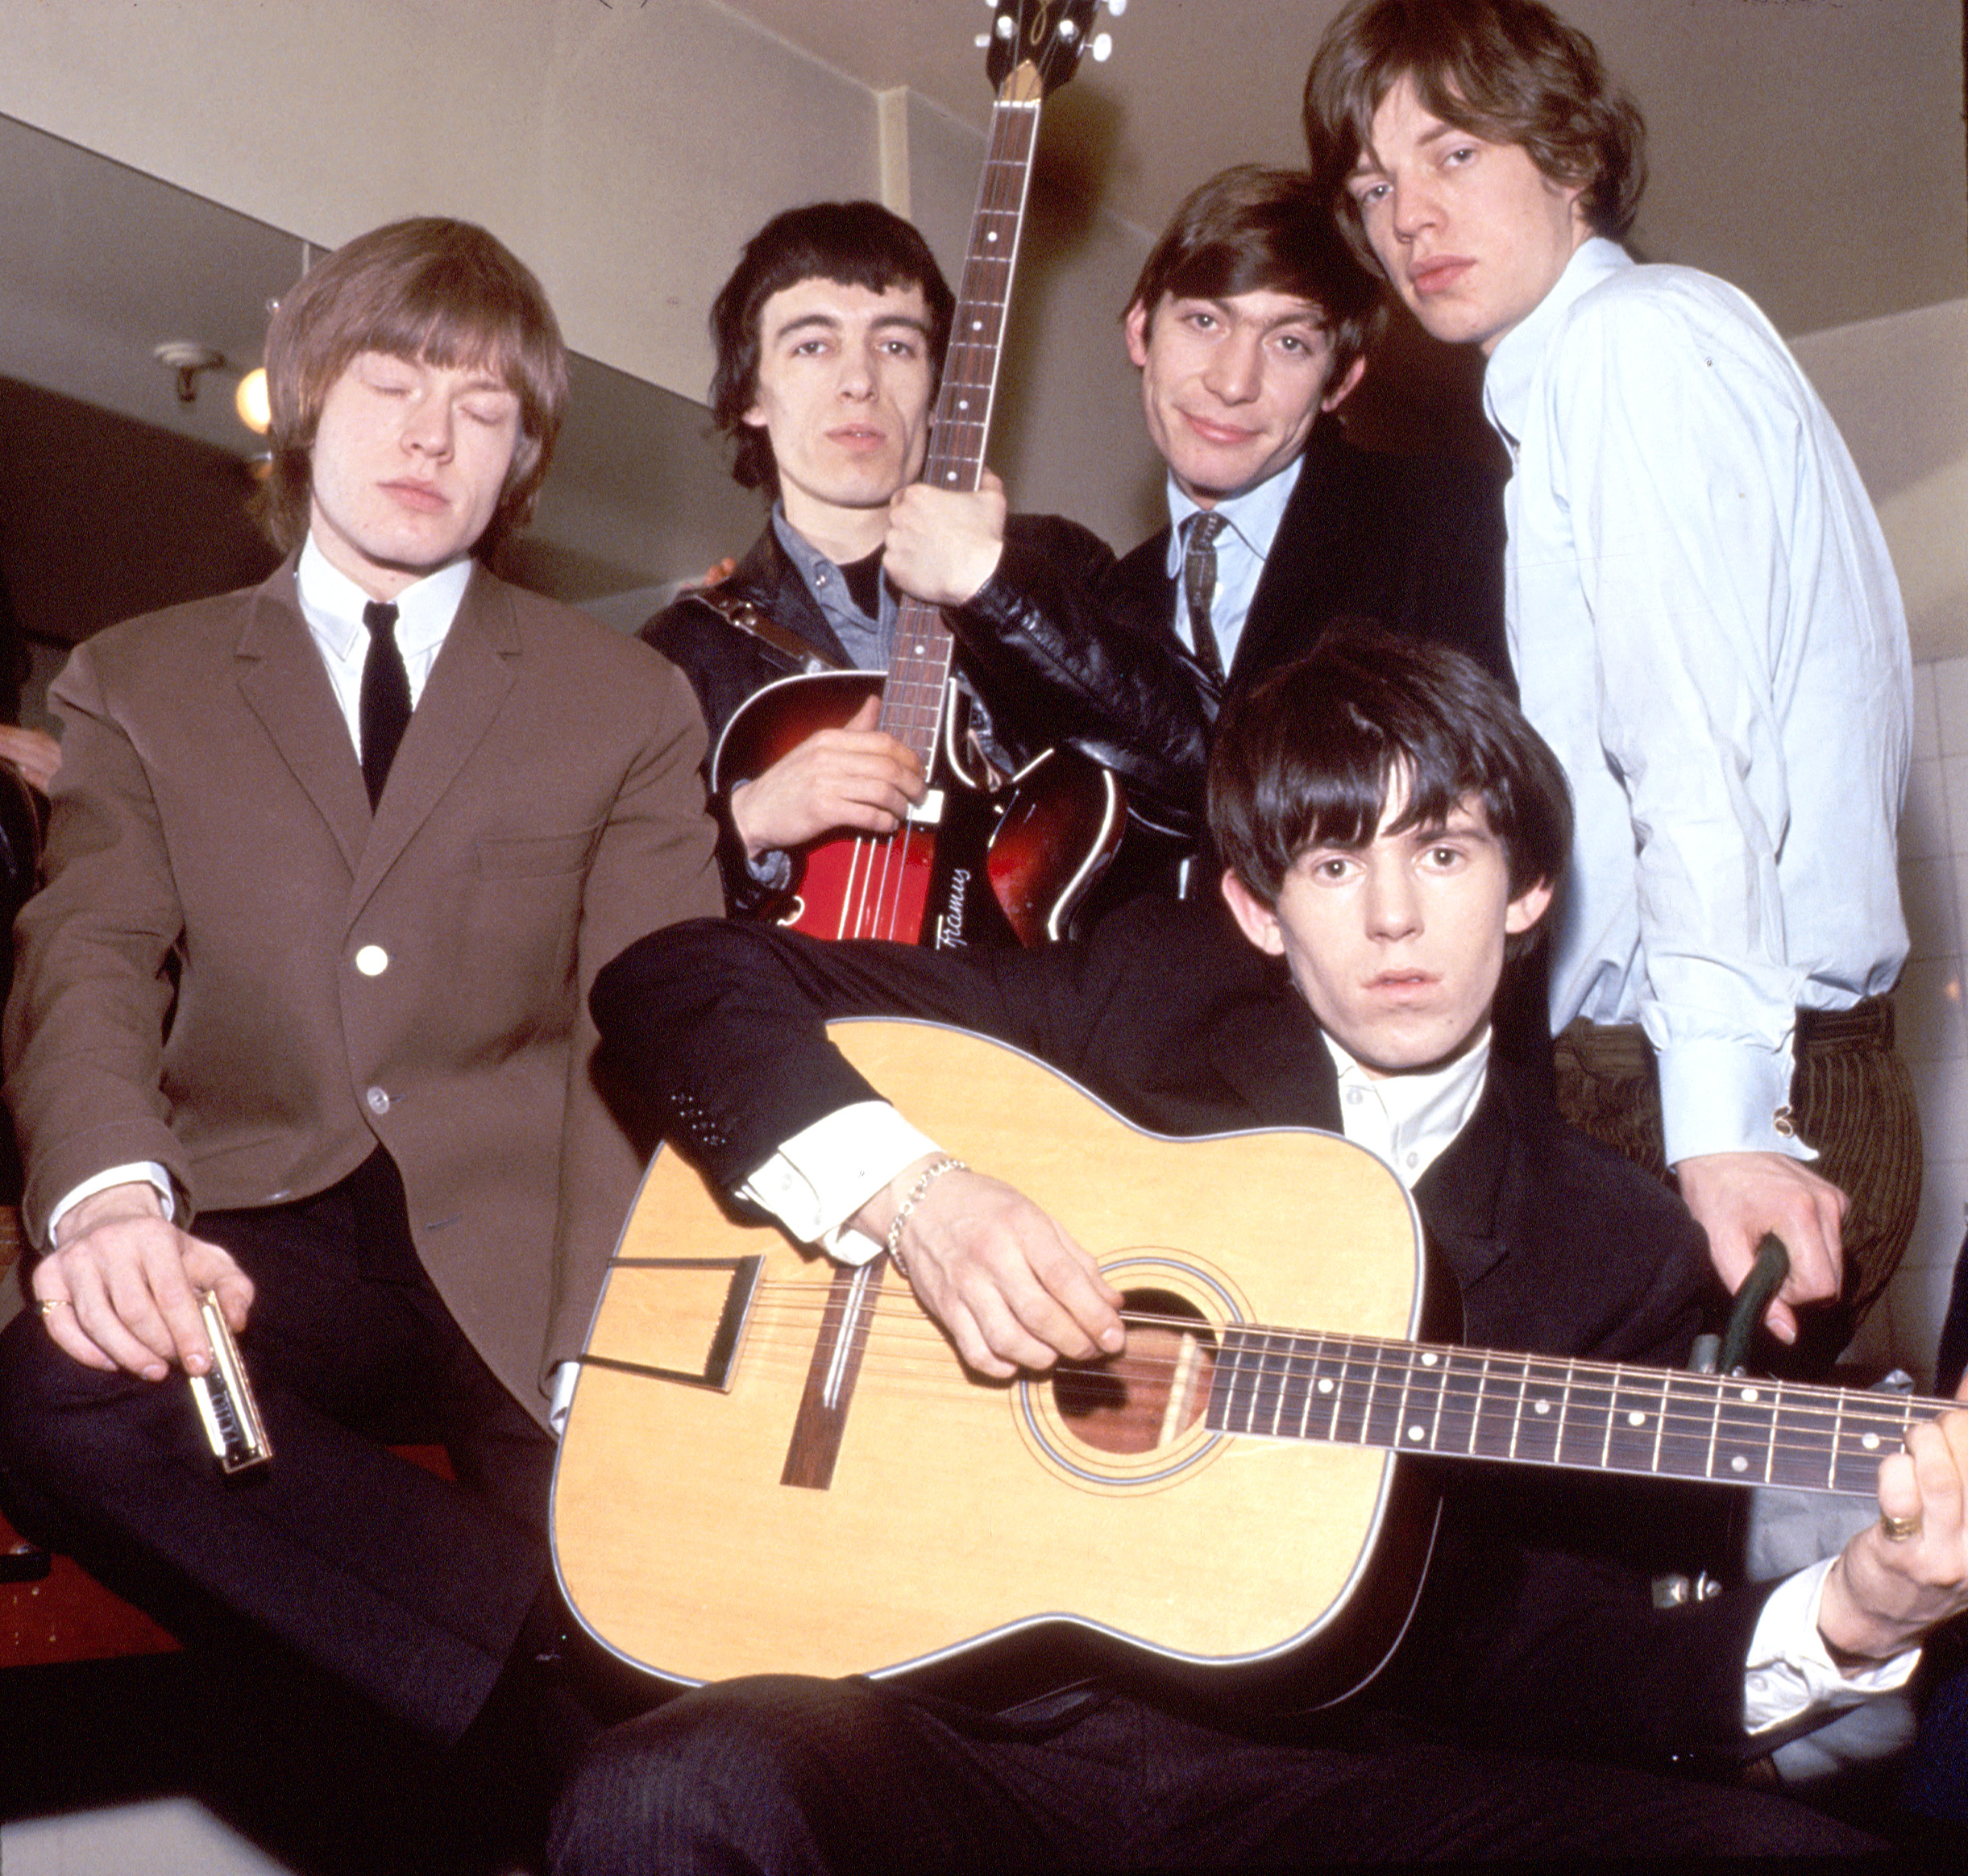 The Rolling Stones taken in the 1960's, from left to right, Brian Jones, Bill Wyman, Charlie Watts, Keith Richards and Mick Jagger.